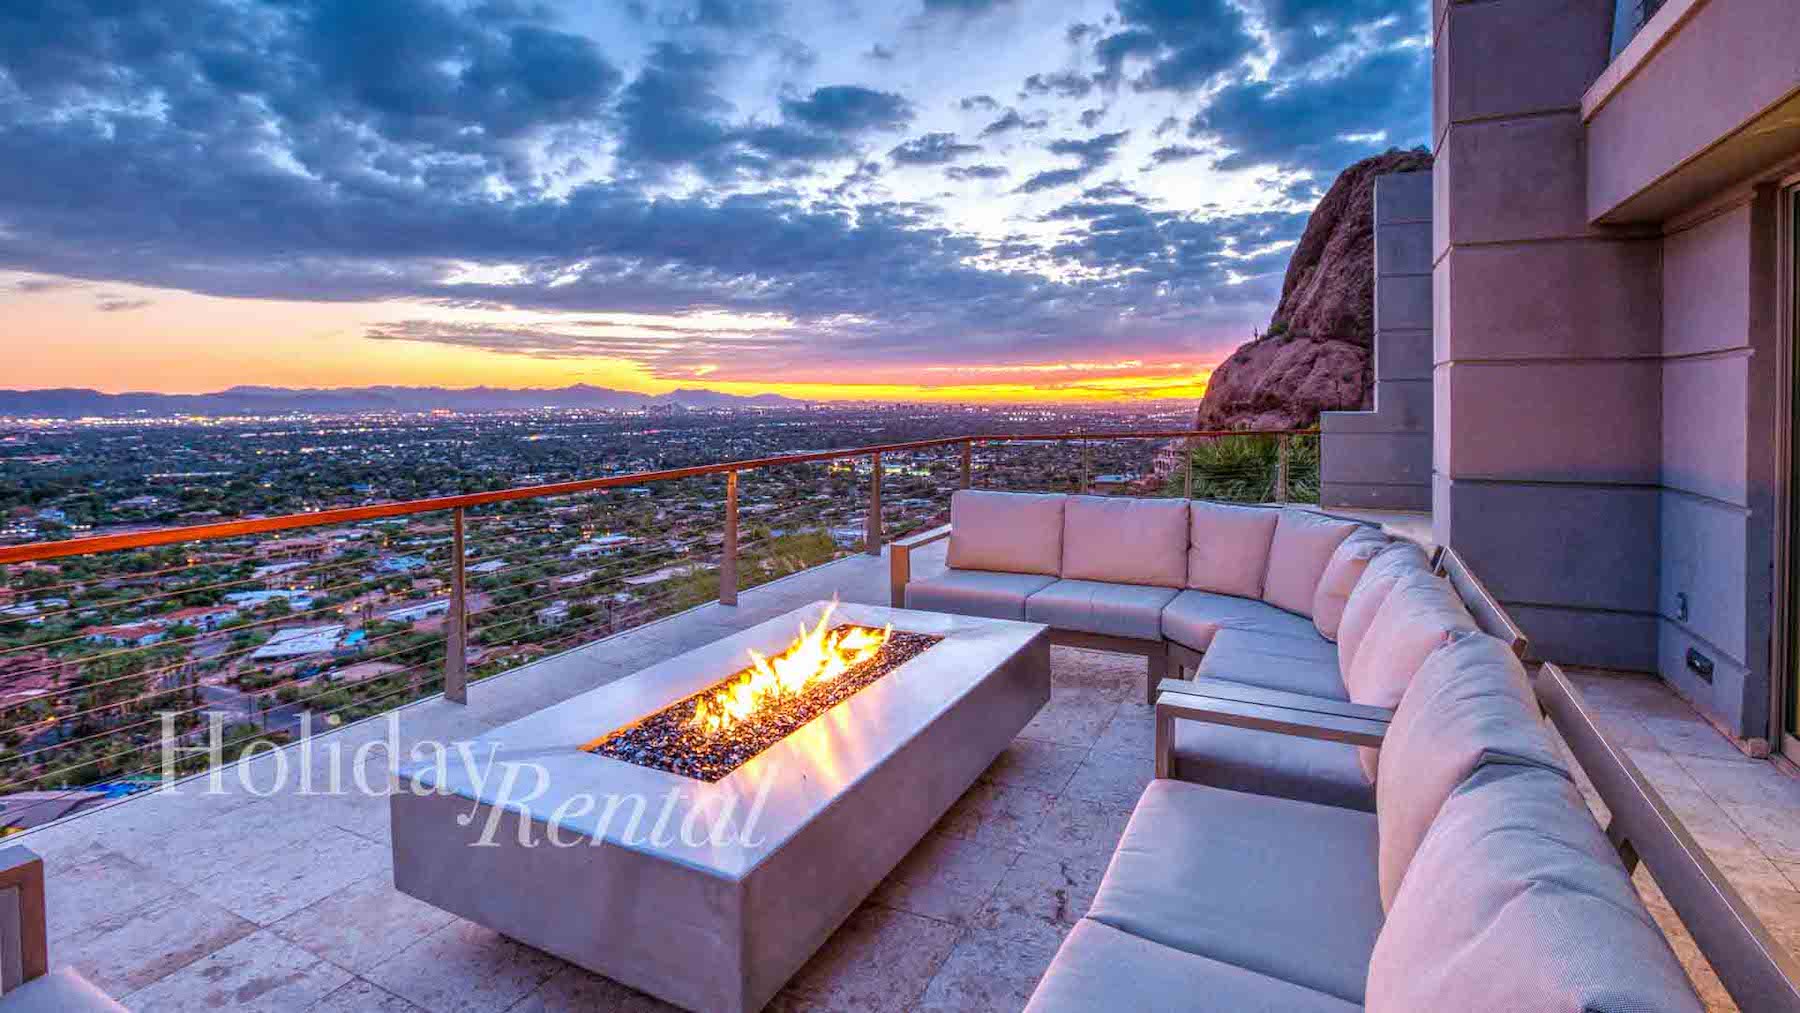 luxury vacation rental firepit with sunset views